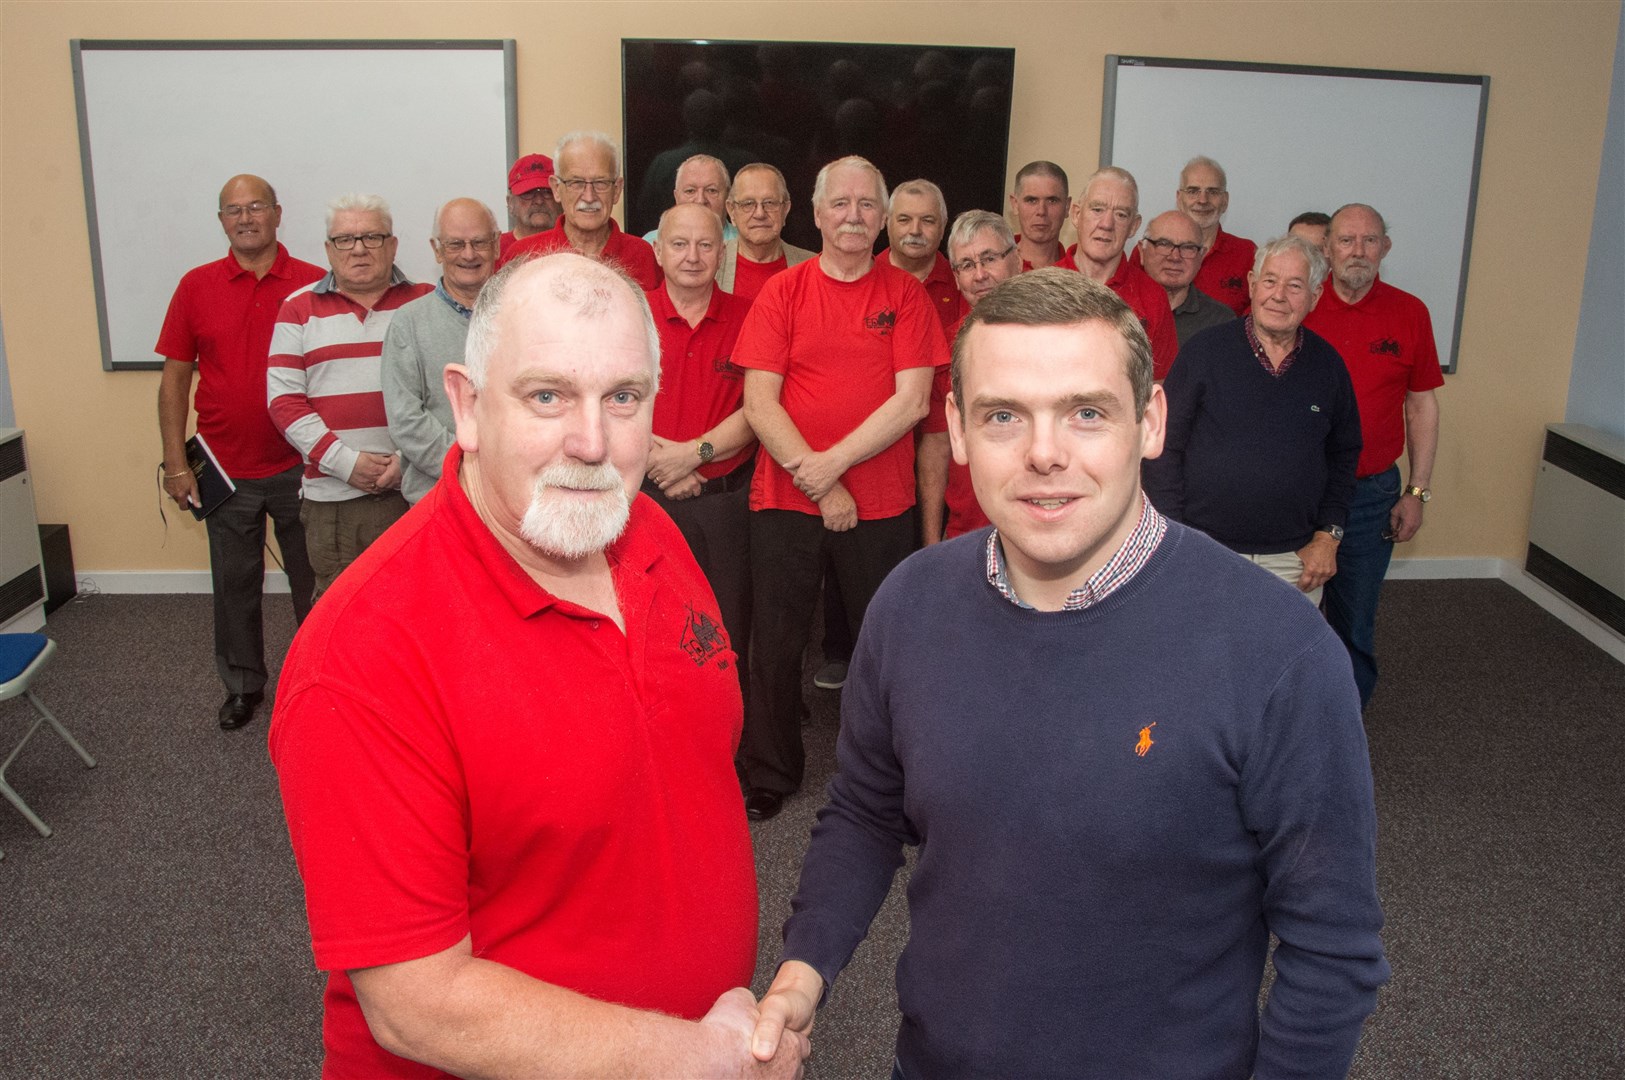 Moray MP Douglas Ross (right) with Elgin and District Men's Shed chairman Alan Baillie and other members.